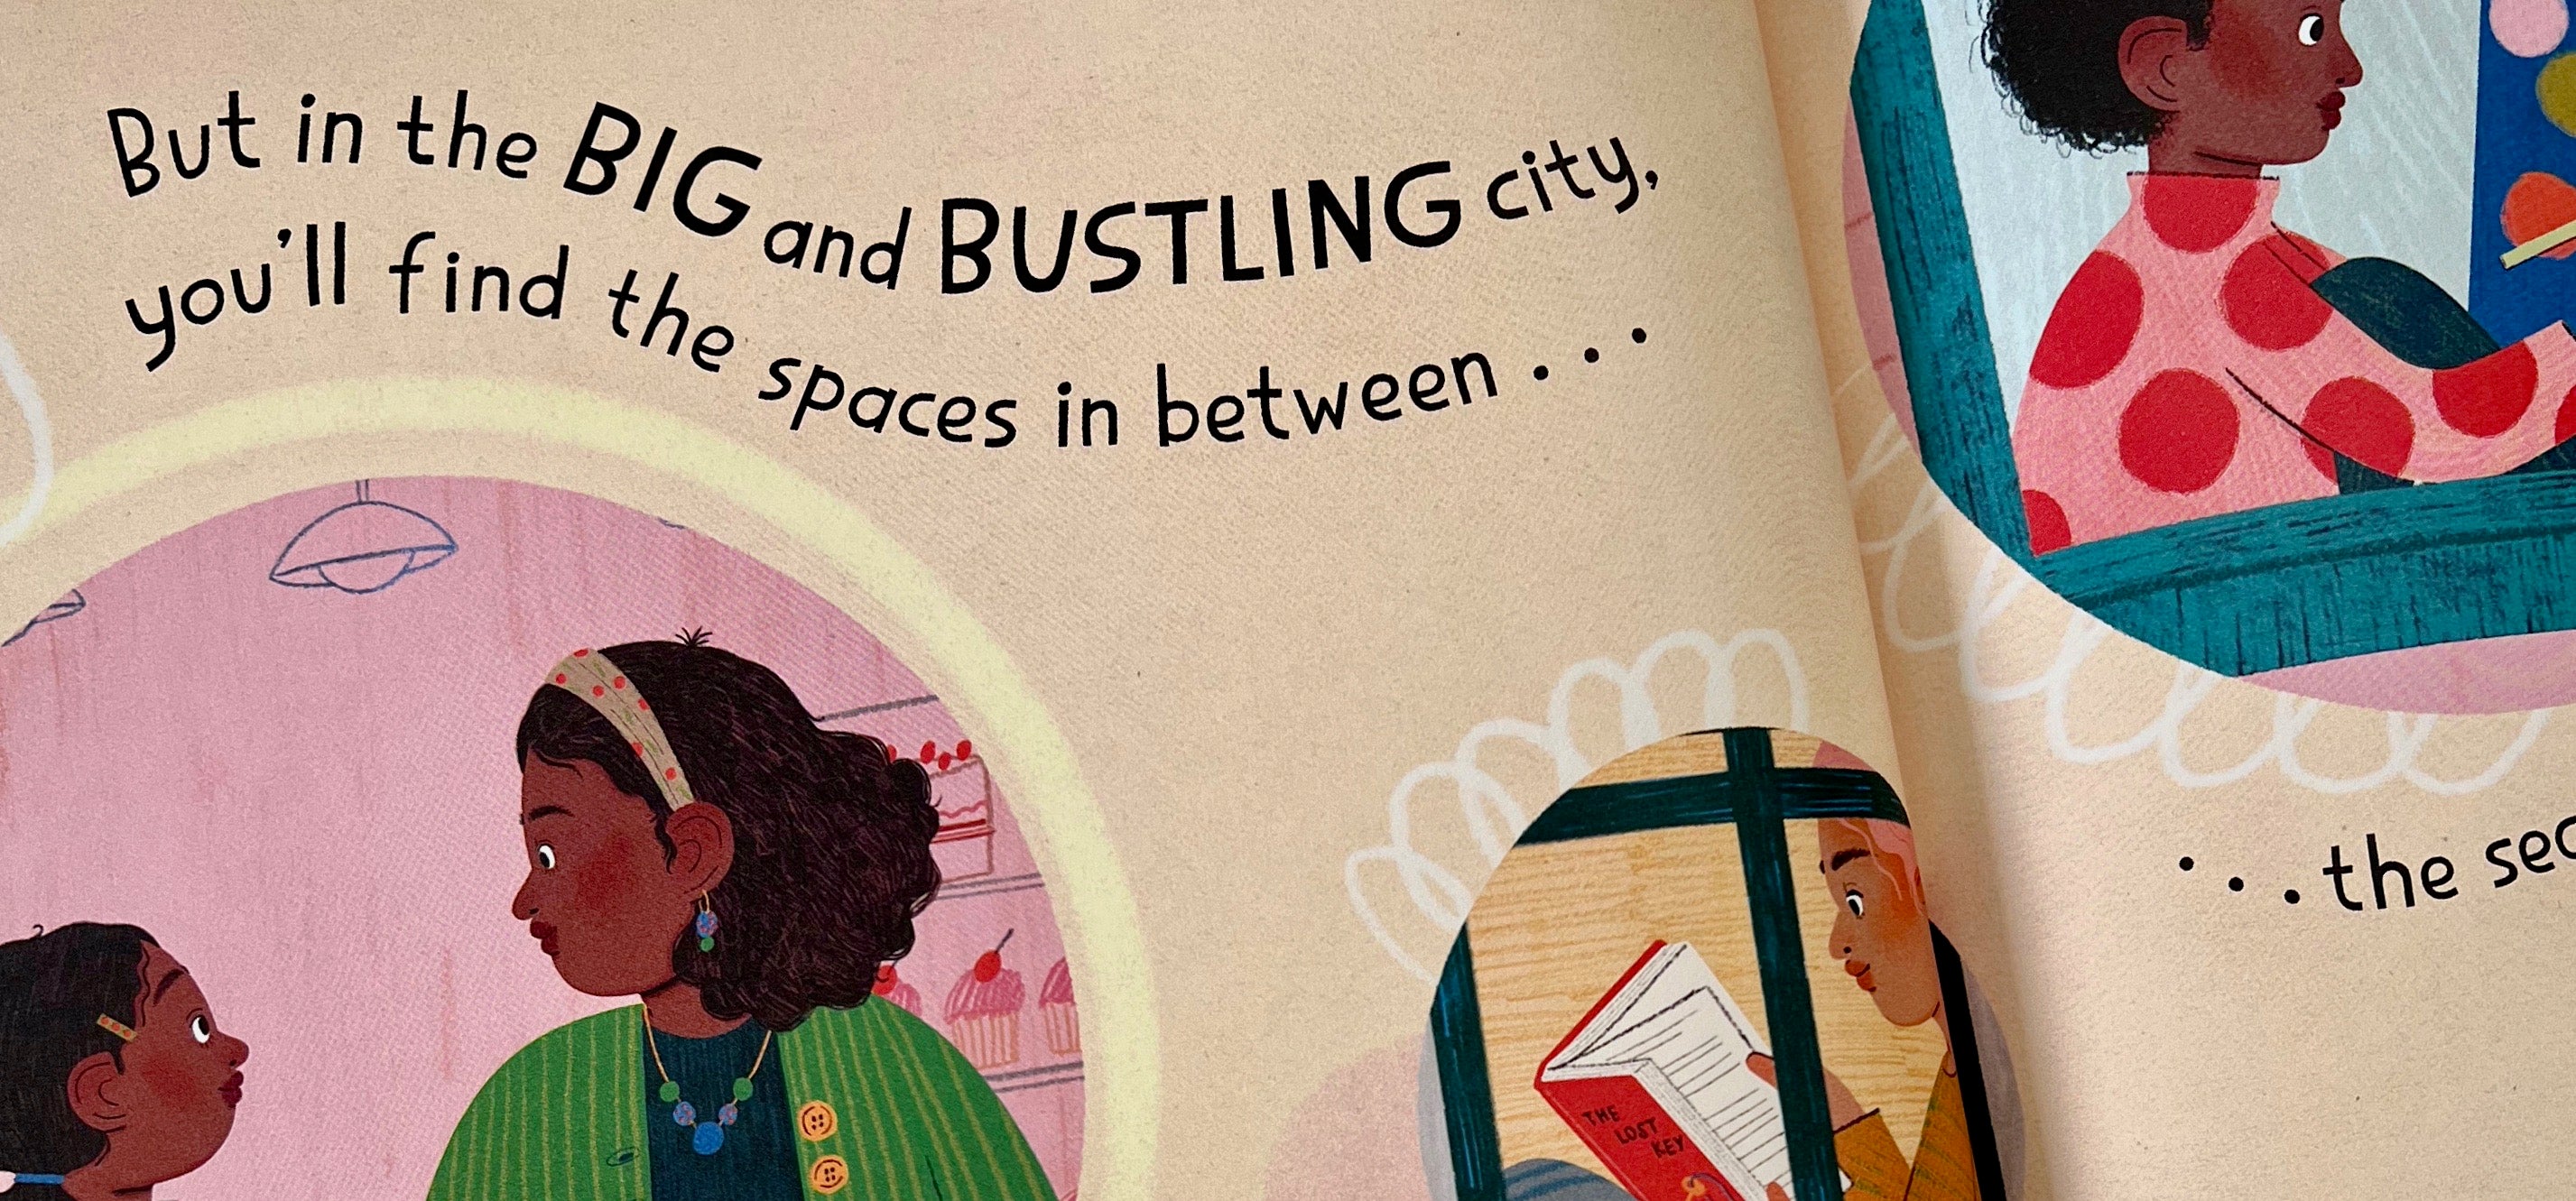 The Spaces In Between: Finding mindfulness moments in the city